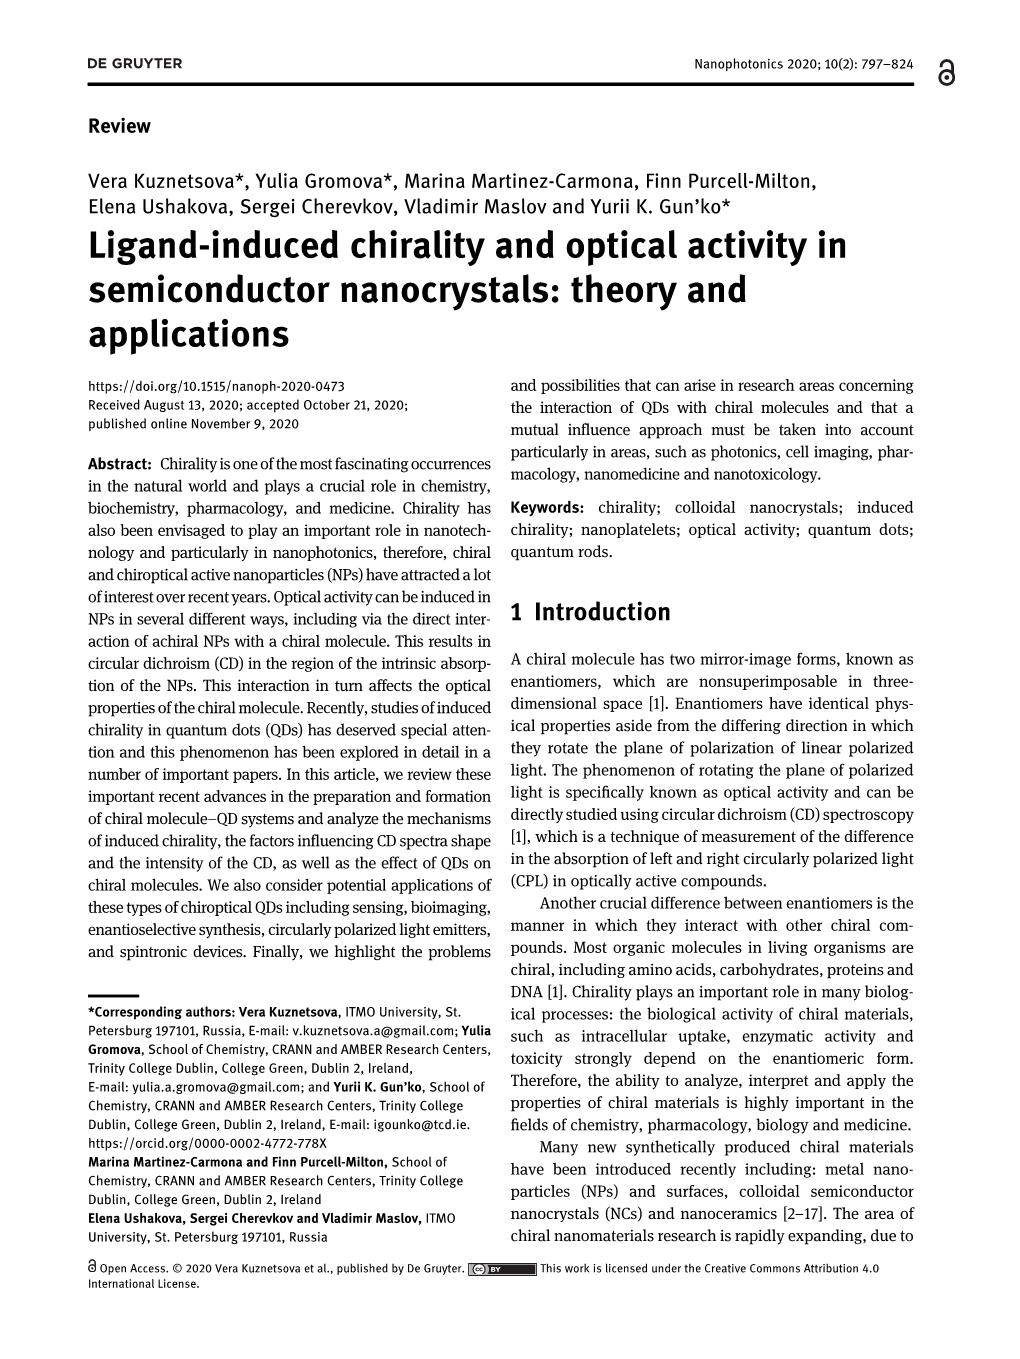 Ligand-Induced Chirality and Optical Activity in Semiconductor Nanocrystals